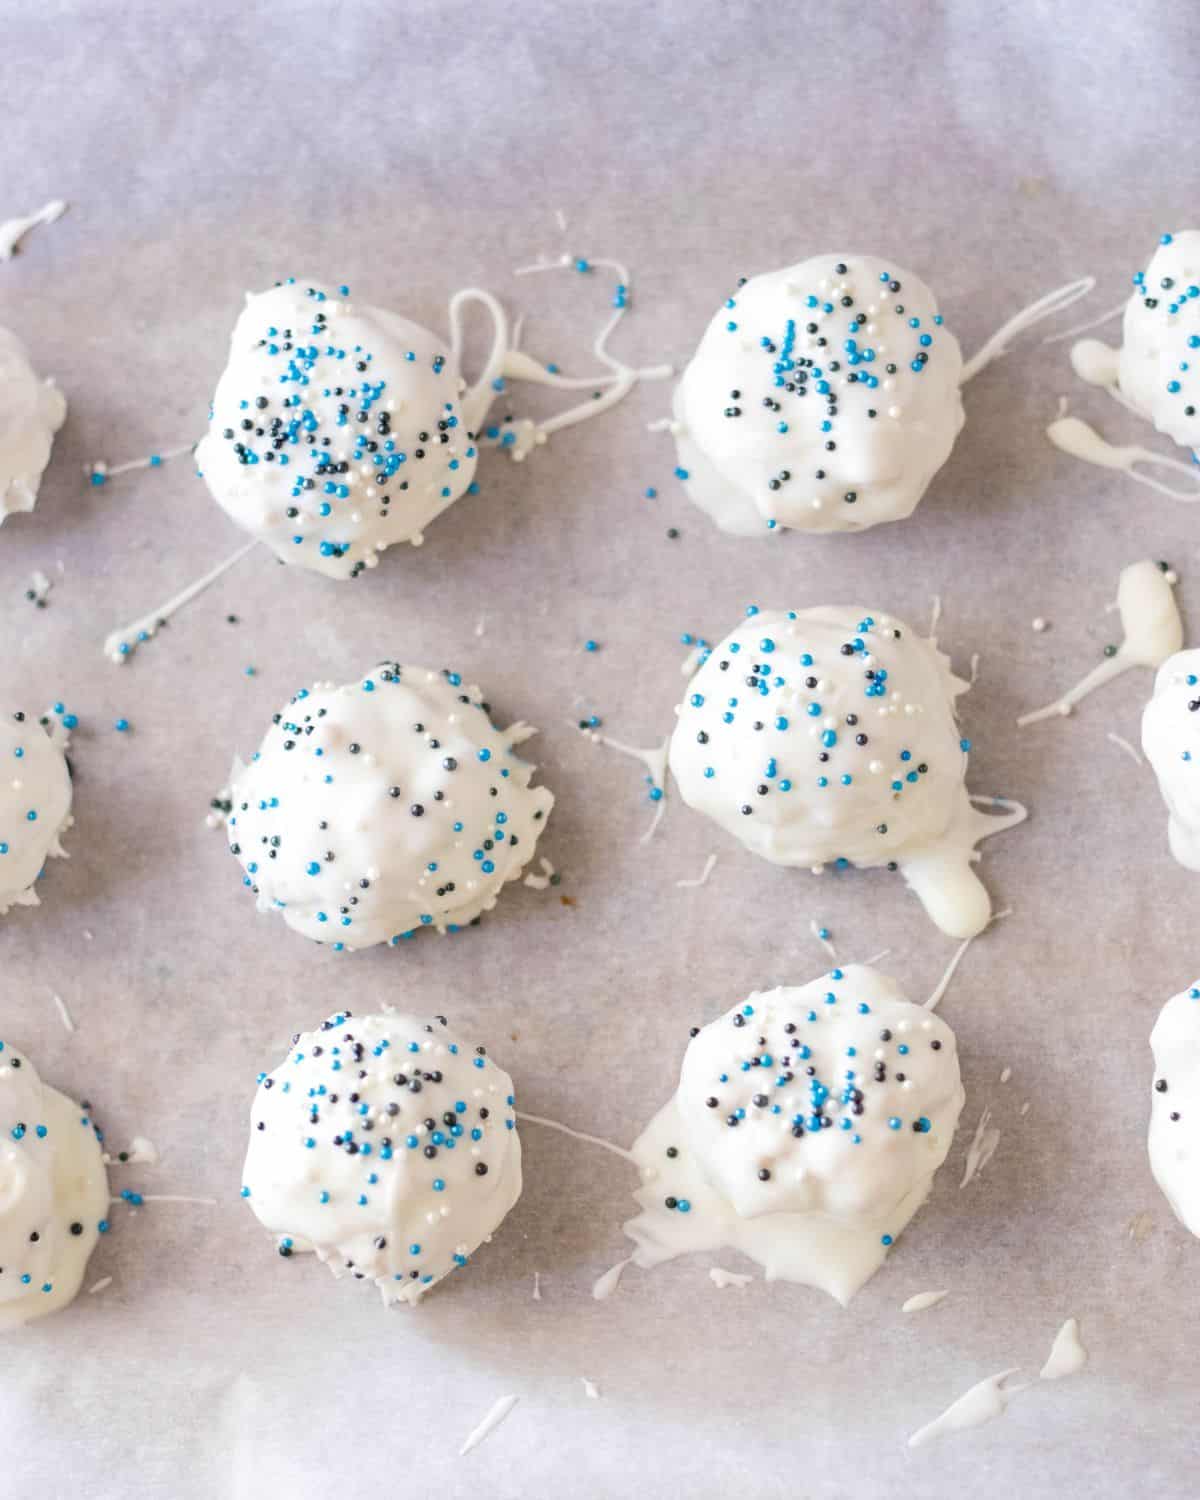 Peanut Butter Balls decorated with white chocolate and sprinkles on a large plate.